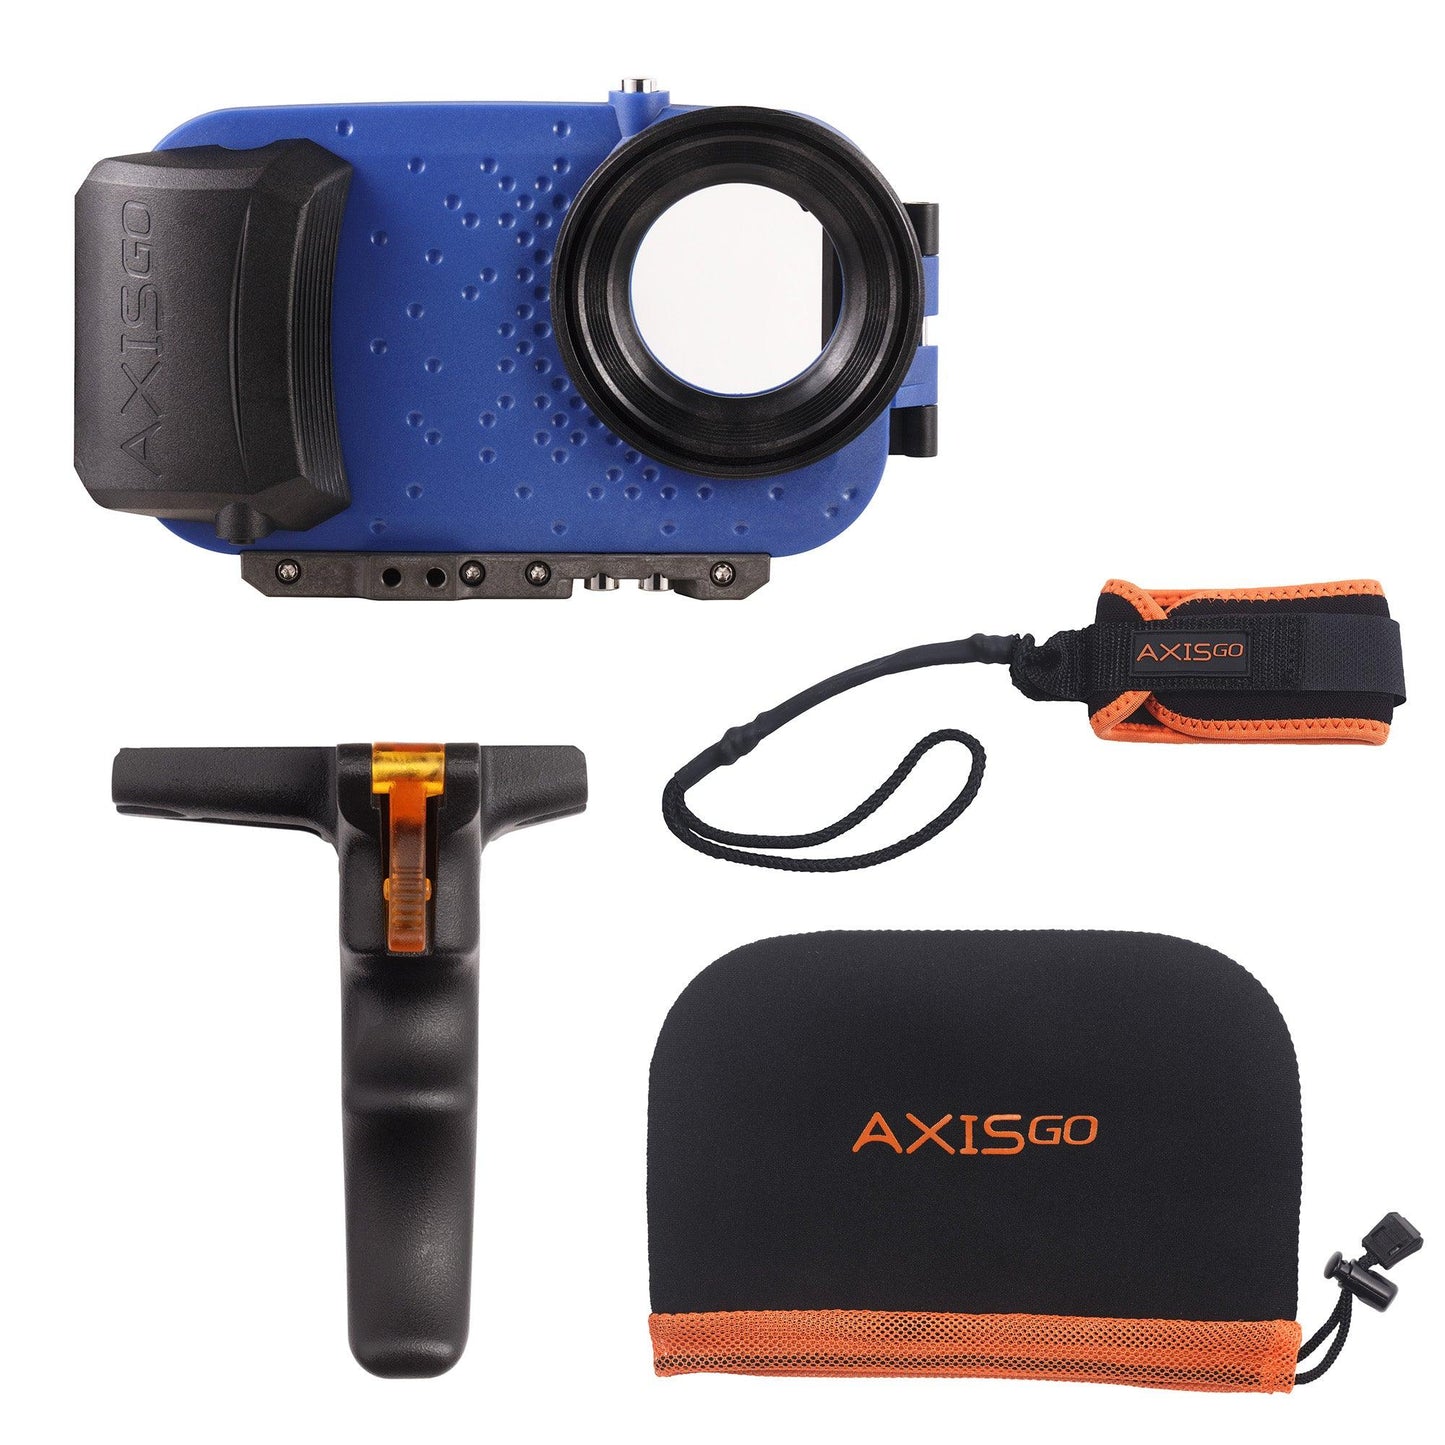 AxisGO Action Kit for 11 Pro Max / Xs Max